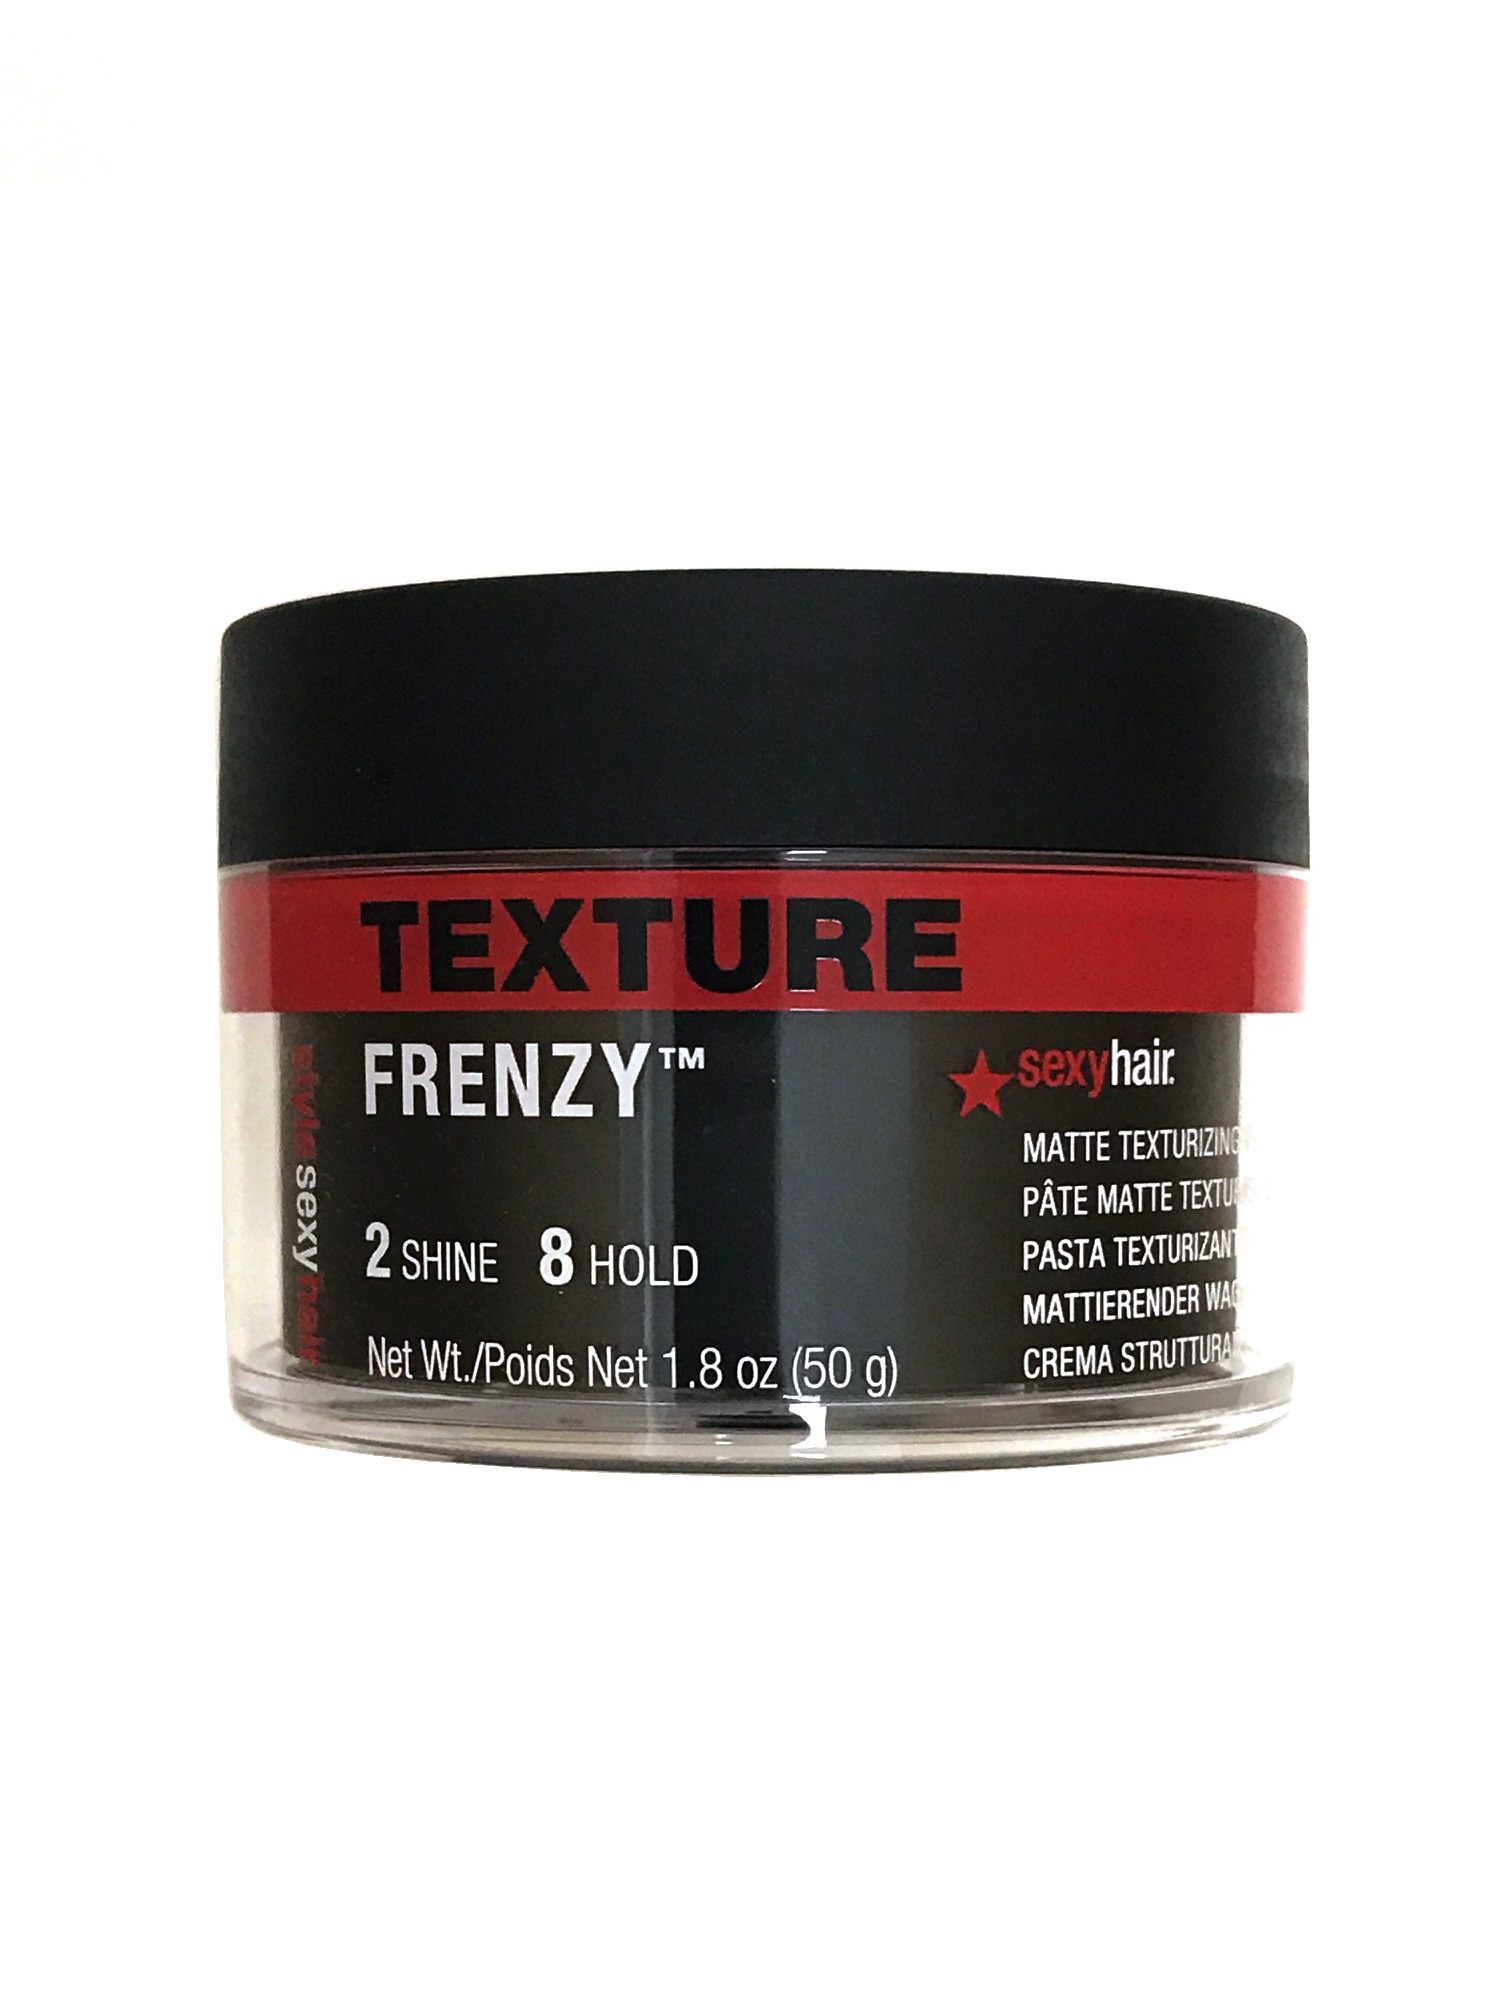 Sexy Hair Style Sexy Hair Frenzy Matte Texturizing Paste 2 Shine 8 Hold 1.8oz - image 1 of 2